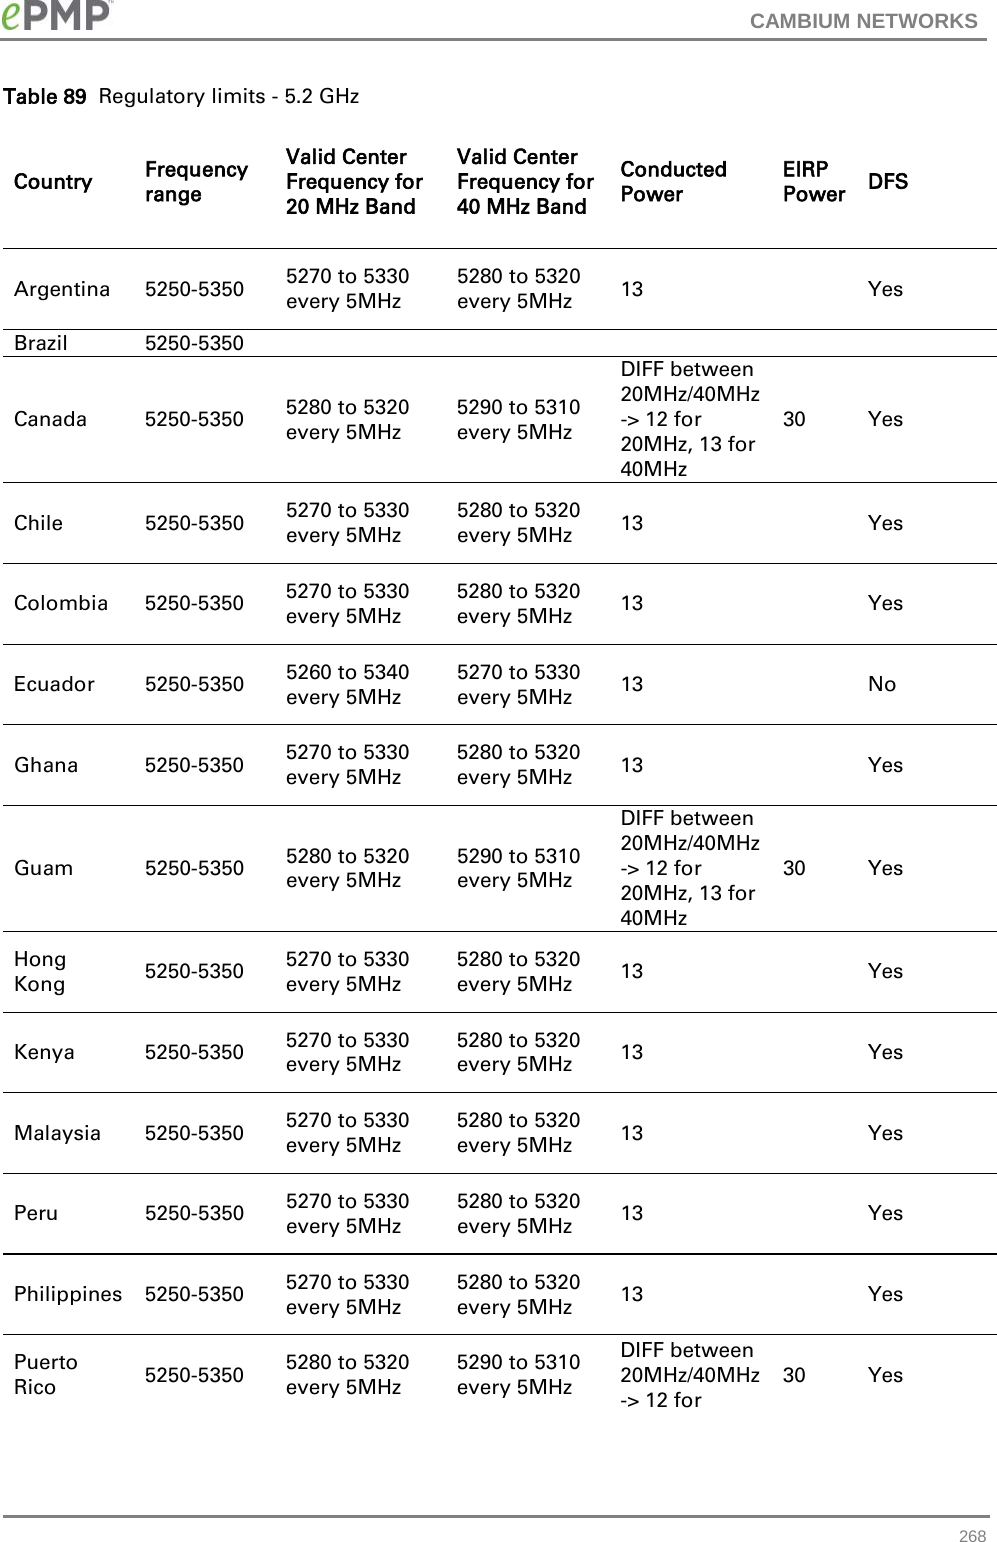 CAMBIUM NETWORKS  Table 89  Regulatory limits - 5.2 GHz Country Frequency range Valid Center Frequency for 20 MHz Band Valid Center Frequency for 40 MHz Band Conducted Power EIRP Power DFS Argentina 5250-5350 5270 to 5330 every 5MHz 5280 to 5320 every 5MHz 13     Yes Brazil 5250-5350           Canada 5250-5350 5280 to 5320 every 5MHz 5290 to 5310 every 5MHz DIFF between 20MHz/40MHz -&gt; 12 for 20MHz, 13 for 40MHz 30 Yes Chile 5250-5350 5270 to 5330 every 5MHz 5280 to 5320 every 5MHz 13     Yes Colombia 5250-5350 5270 to 5330 every 5MHz 5280 to 5320 every 5MHz 13     Yes Ecuador 5250-5350 5260 to 5340 every 5MHz 5270 to 5330 every 5MHz 13     No Ghana 5250-5350 5270 to 5330 every 5MHz 5280 to 5320 every 5MHz 13     Yes Guam 5250-5350 5280 to 5320 every 5MHz 5290 to 5310 every 5MHz DIFF between 20MHz/40MHz -&gt; 12 for 20MHz, 13 for 40MHz 30 Yes Hong Kong 5250-5350 5270 to 5330 every 5MHz 5280 to 5320 every 5MHz 13     Yes Kenya 5250-5350 5270 to 5330 every 5MHz 5280 to 5320 every 5MHz 13     Yes Malaysia 5250-5350 5270 to 5330 every 5MHz 5280 to 5320 every 5MHz 13     Yes Peru 5250-5350 5270 to 5330 every 5MHz 5280 to 5320 every 5MHz 13     Yes Philippines 5250-5350 5270 to 5330 every 5MHz 5280 to 5320 every 5MHz 13     Yes Puerto Rico 5250-5350 5280 to 5320 every 5MHz 5290 to 5310 every 5MHz DIFF between 20MHz/40MHz -&gt; 12 for 30 Yes  268 